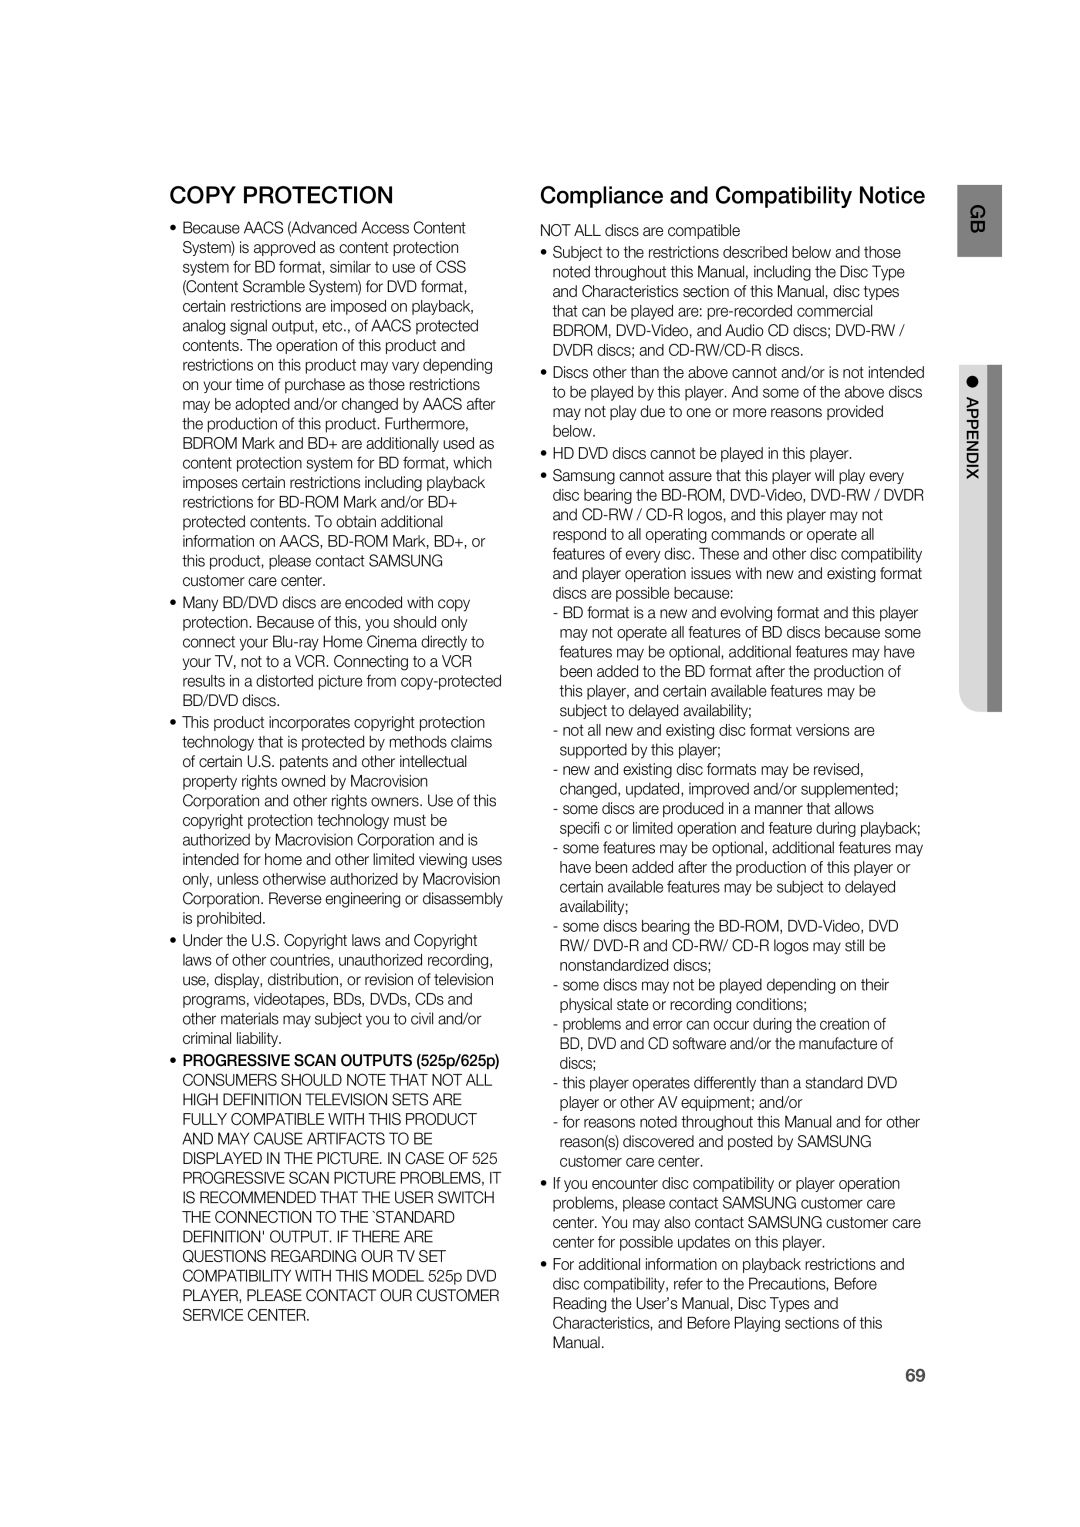 Samsung AH68-02019K manual Copy Protection, Compliance and Compatibility Notice 